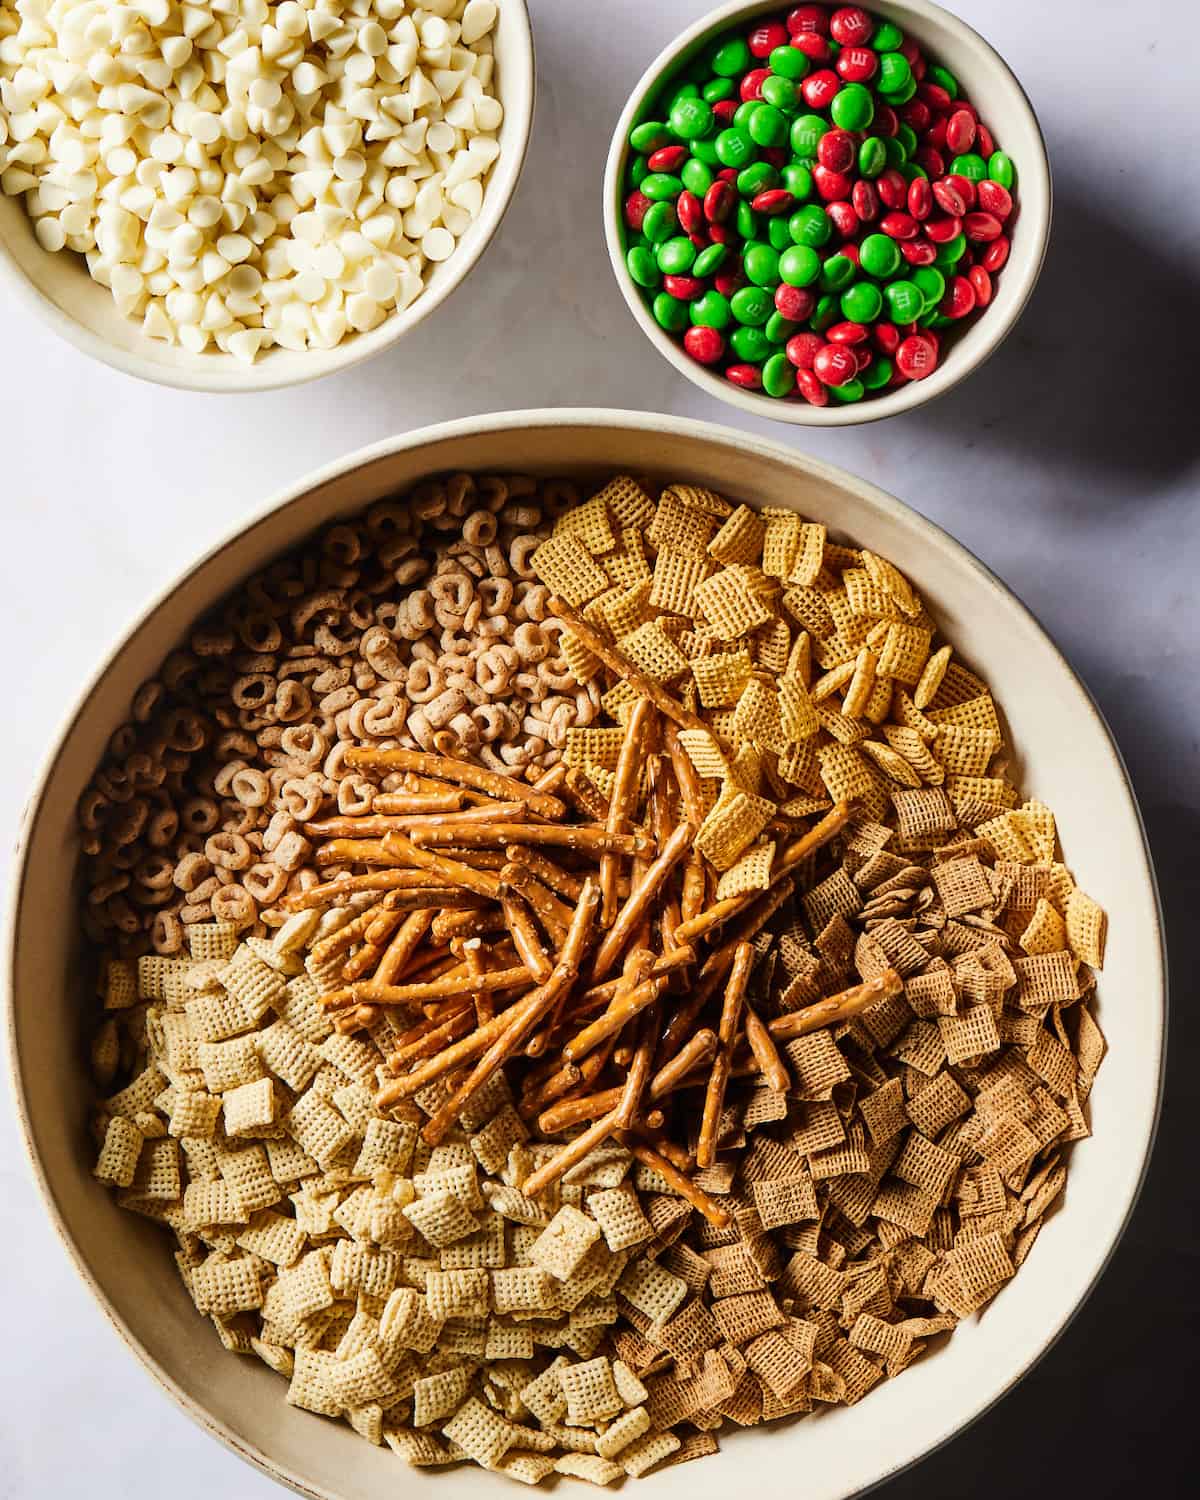 Christmas Chex Mix from www.whatsgabycooking.com (@whatsgabycookin)